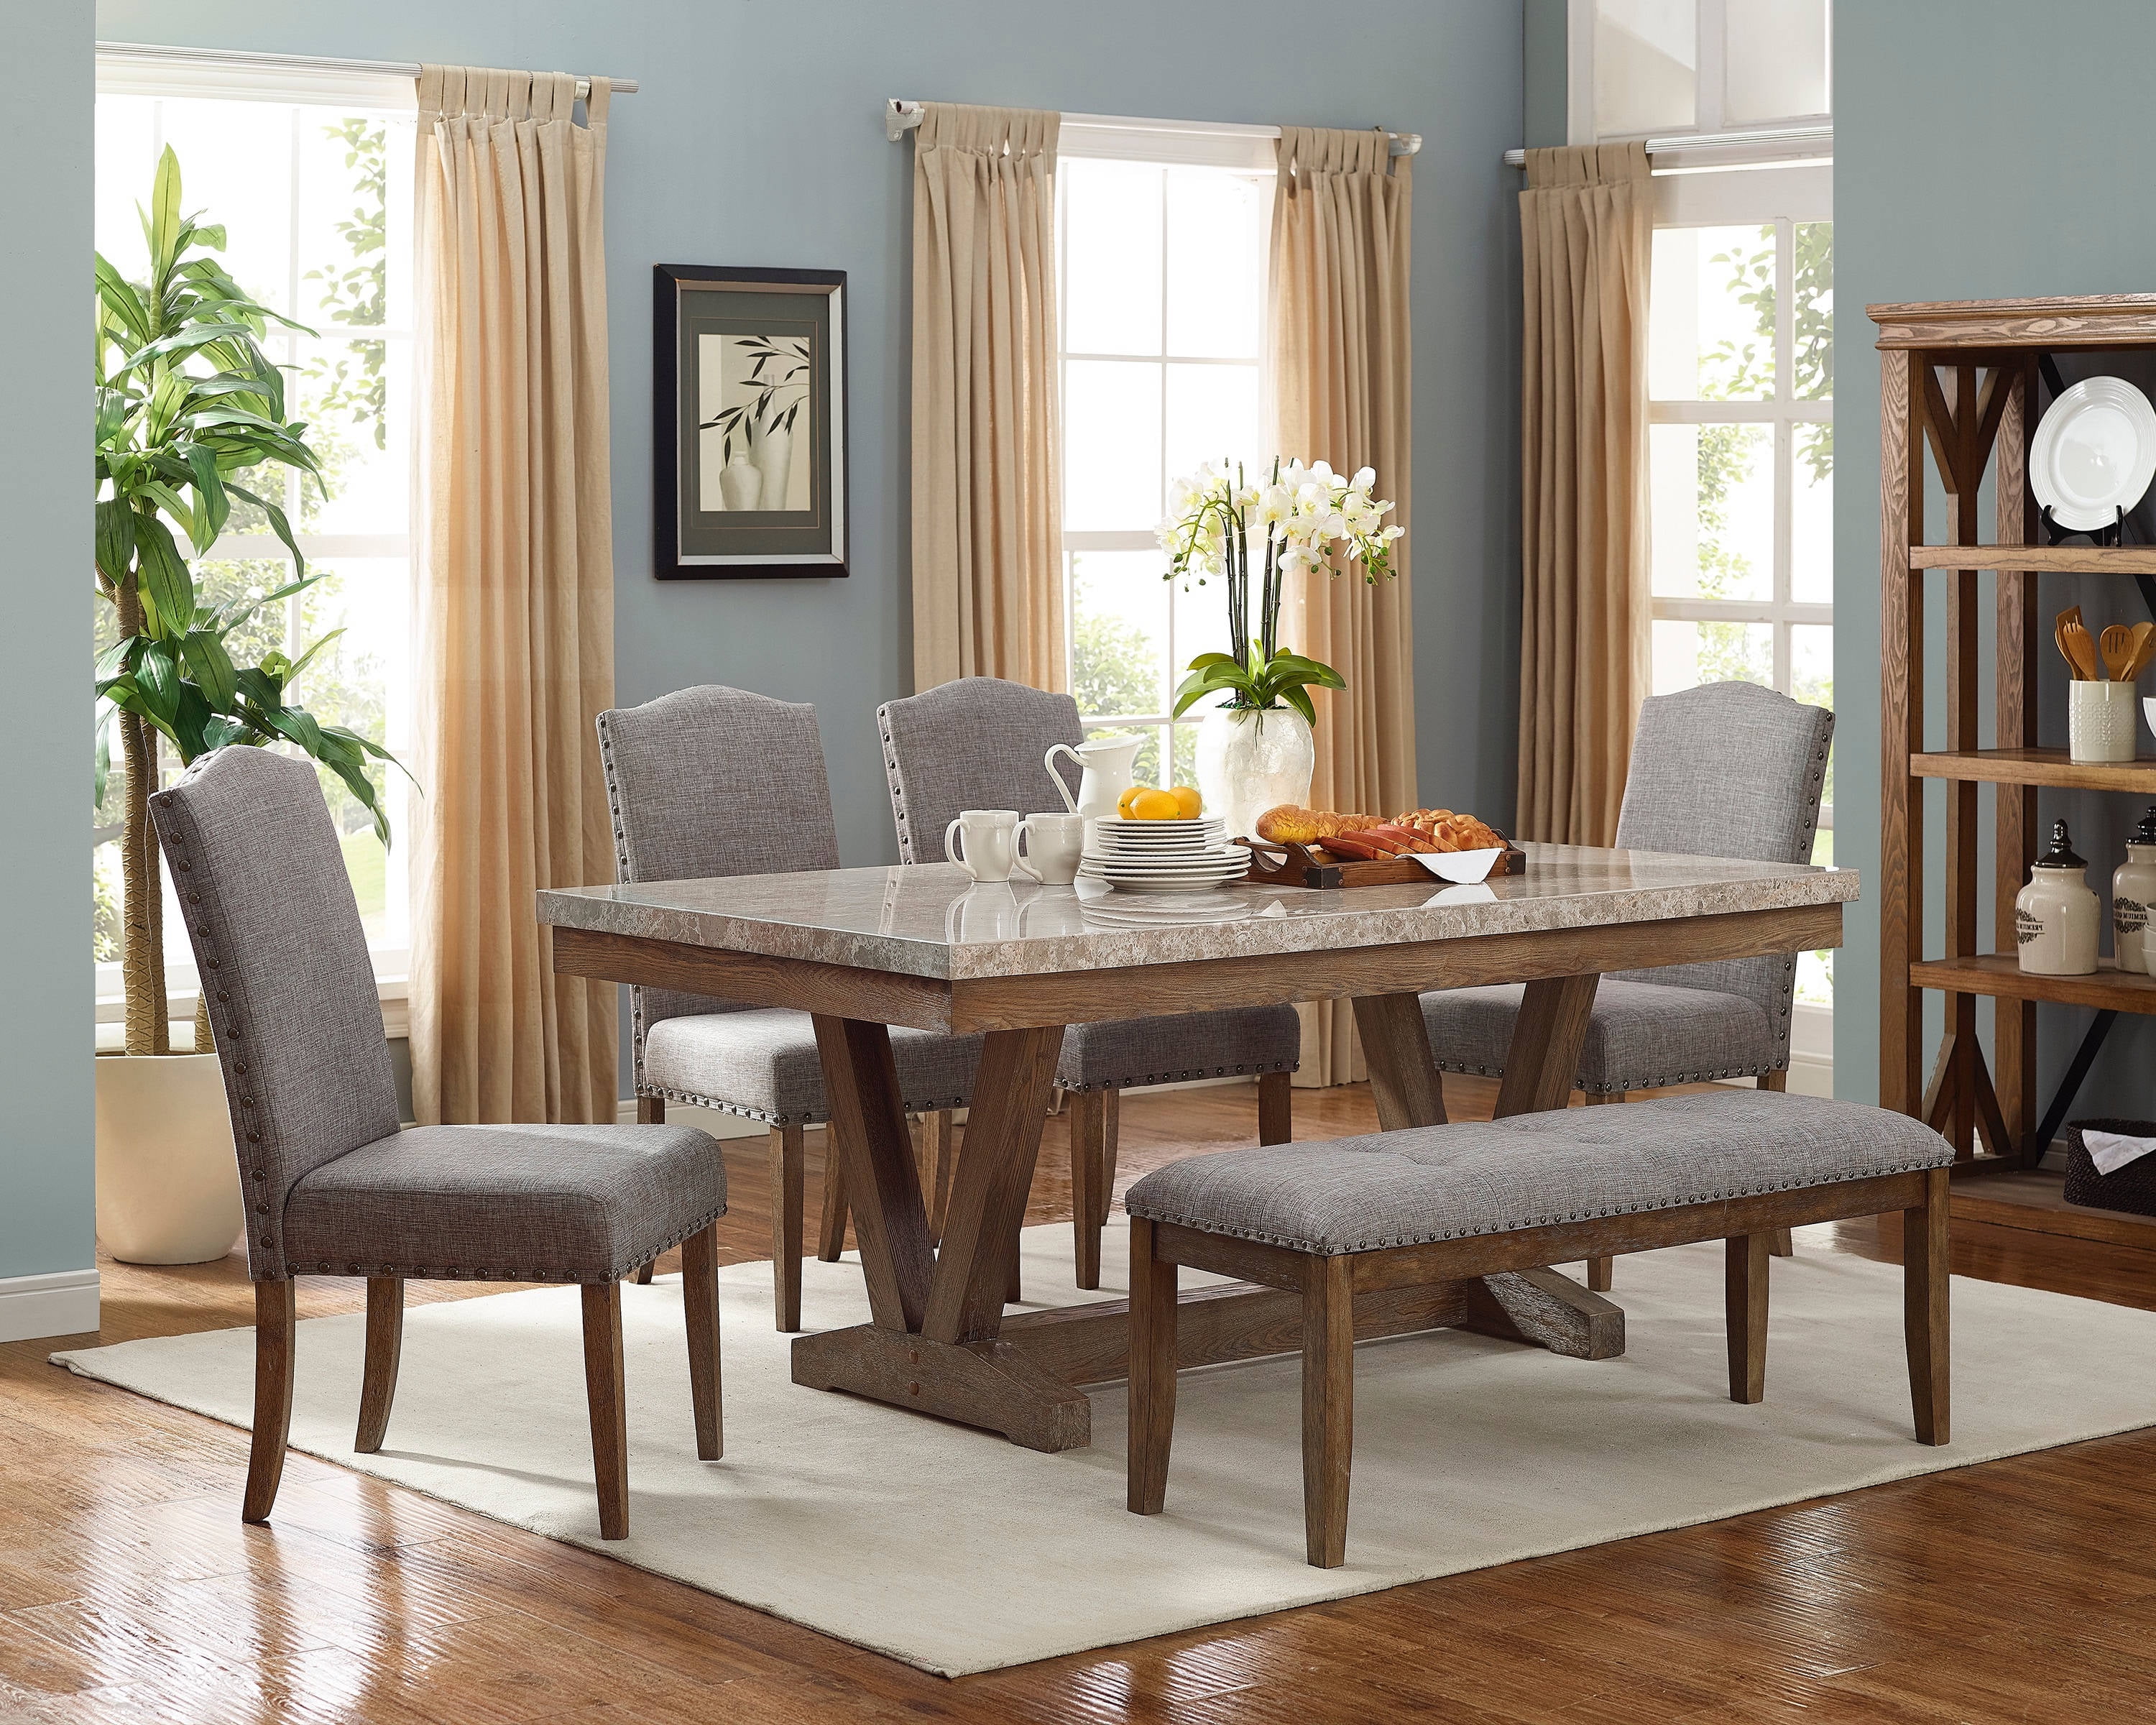 Transitional 6pc Dining Room Set, How To Finish A Dining Room Table Top